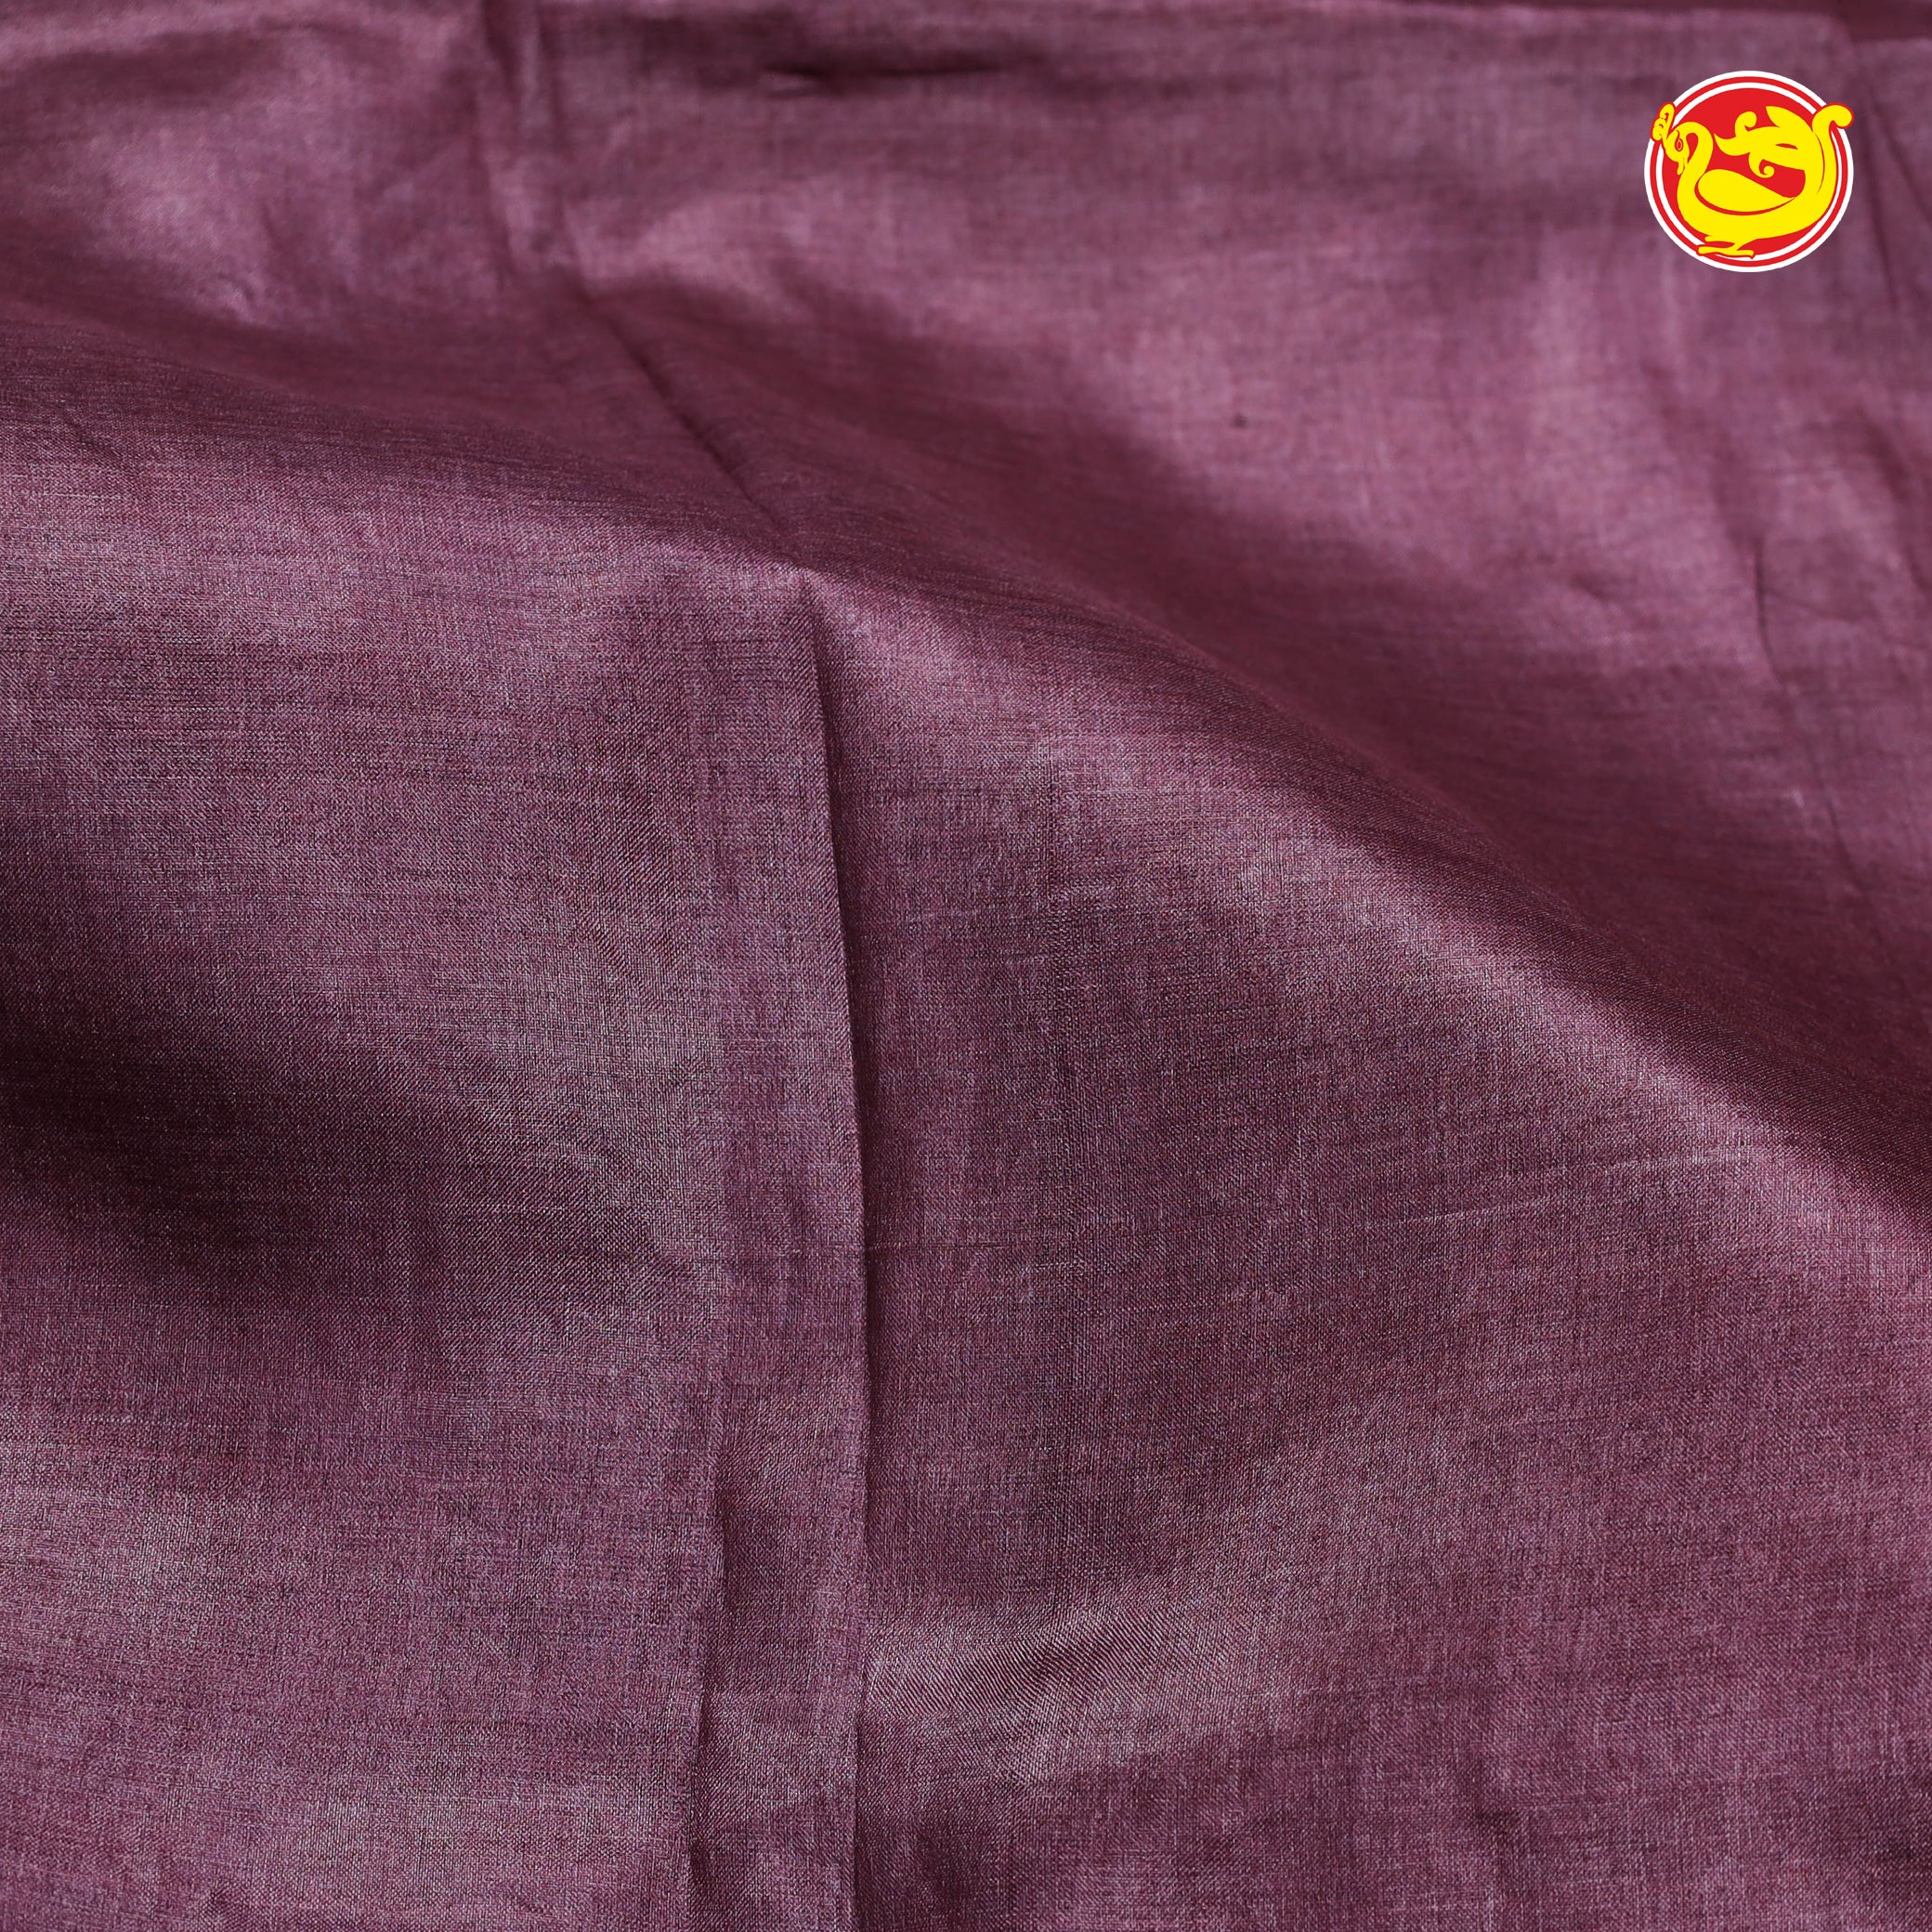 Wine colour pure tussar saree with embroidery details